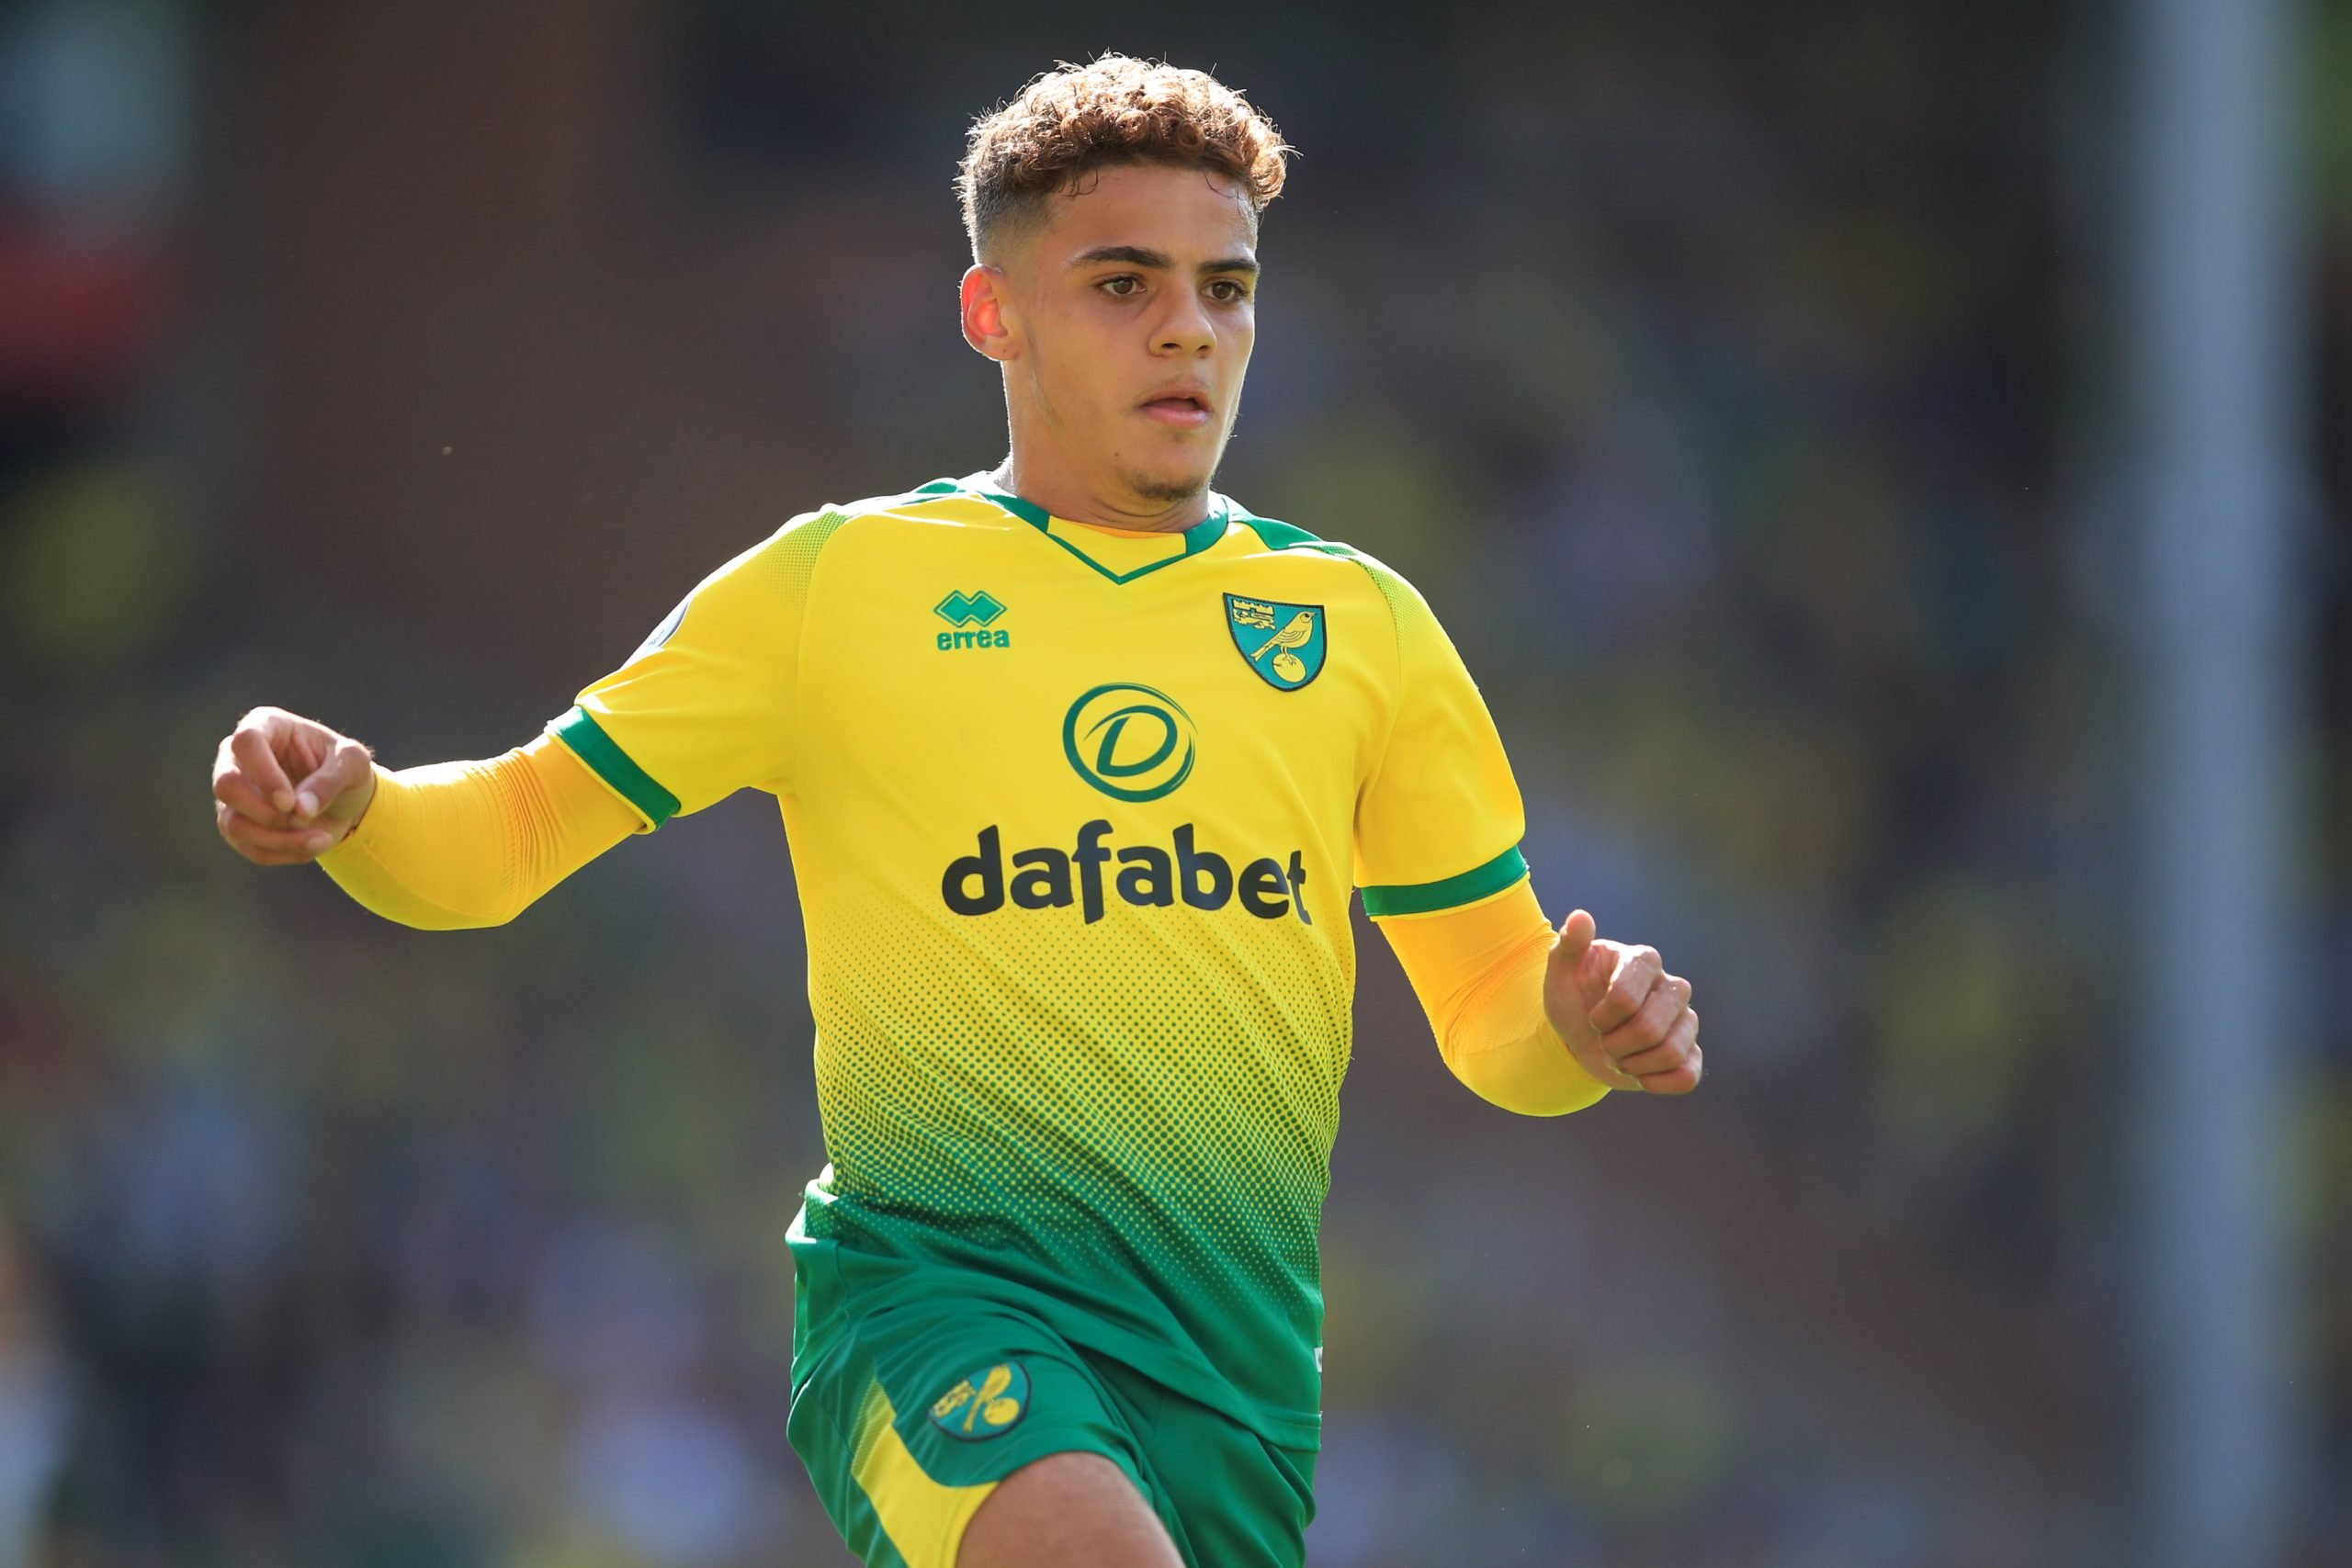 Everton locked in a three-way battle for Max Aarons who is seen in the photo